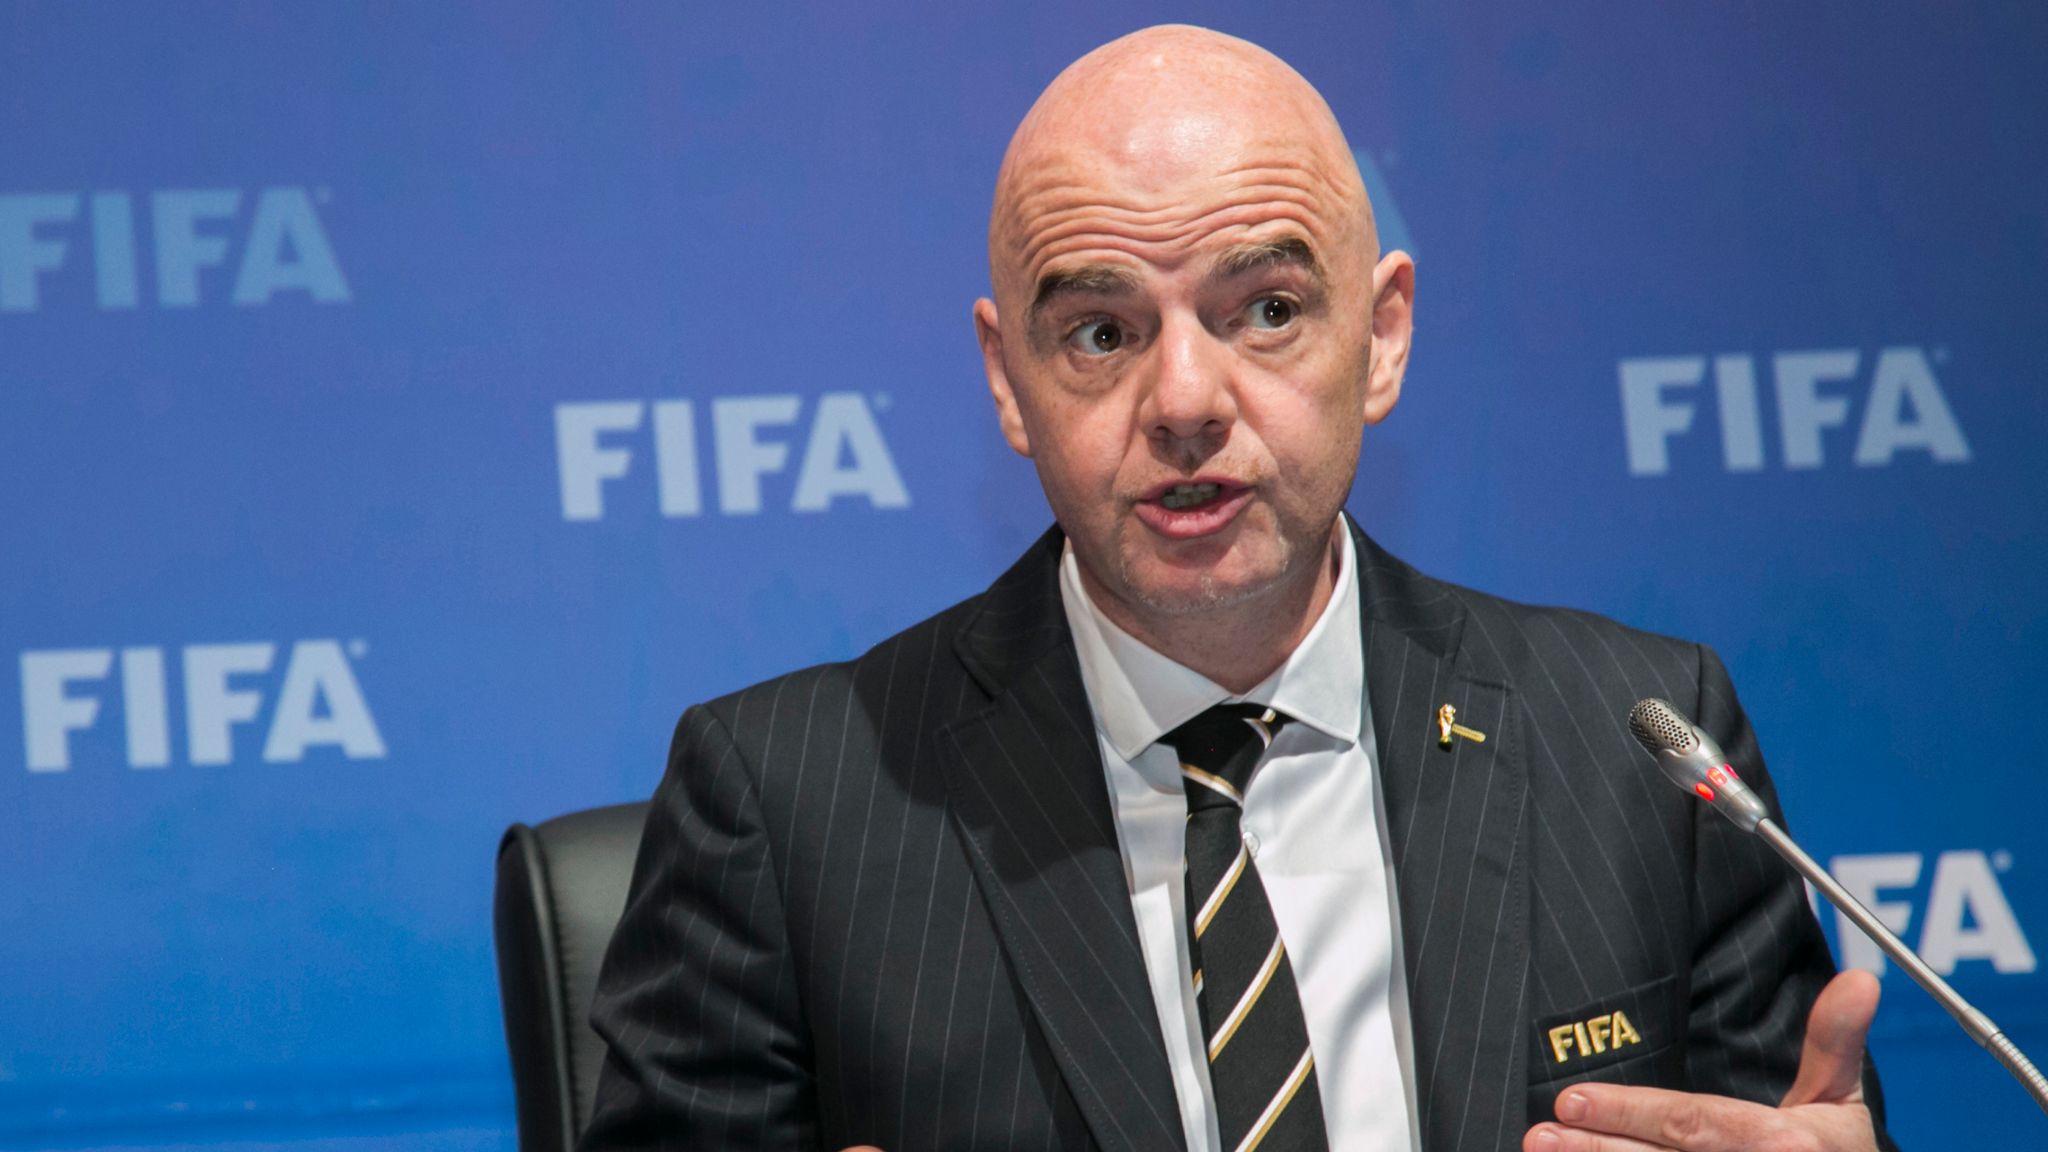 Gianni Infantino set to lead FIFA as president for next four years | Football News | Sky Sports